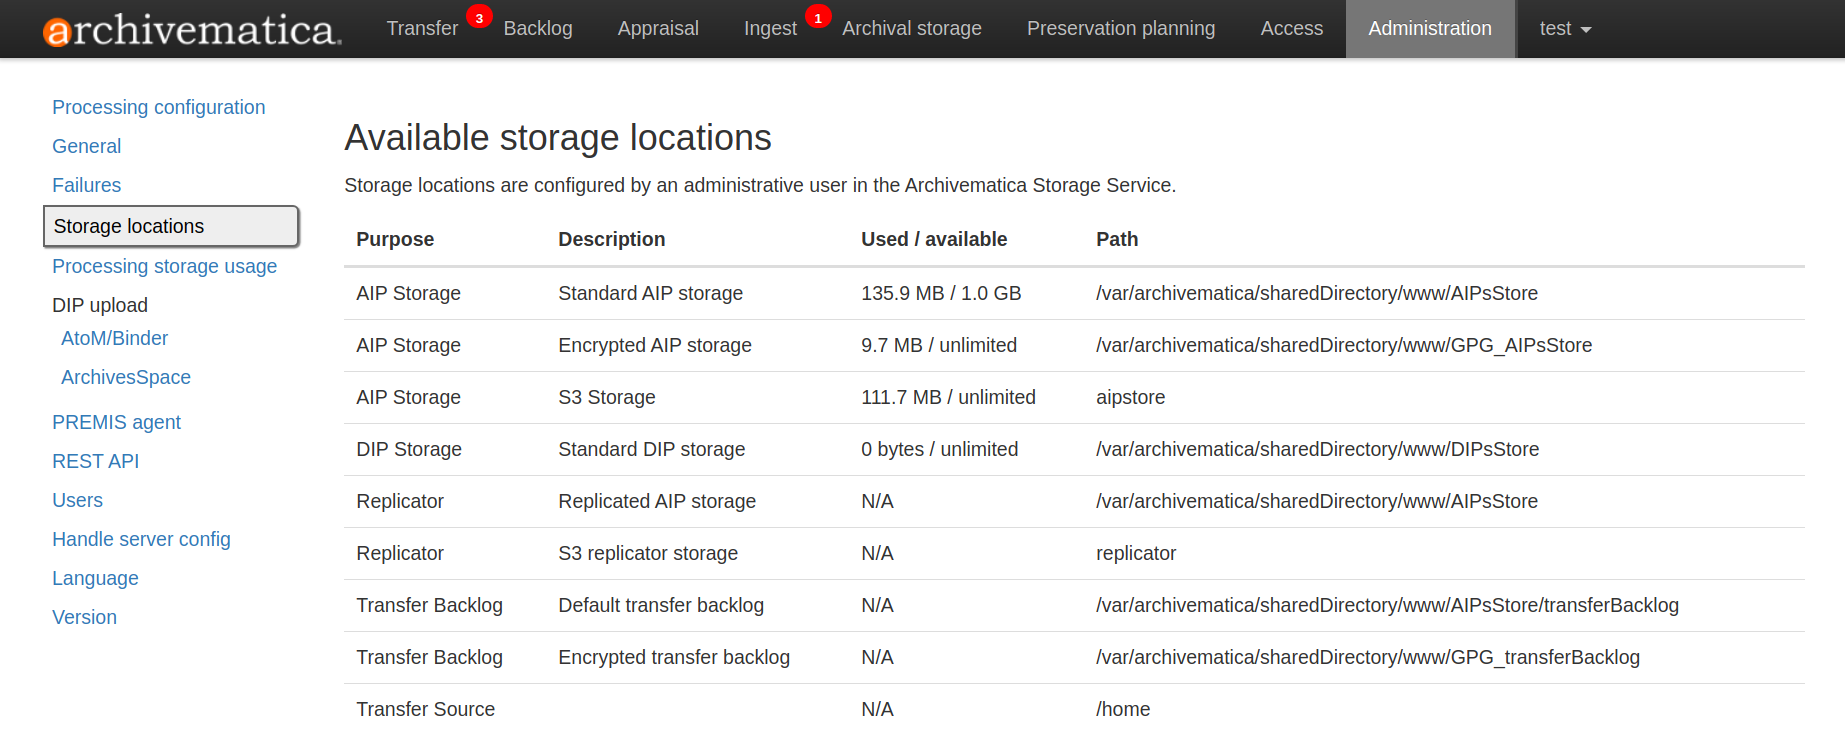 Table showing available storage locations configured for the Archivematica pipeline